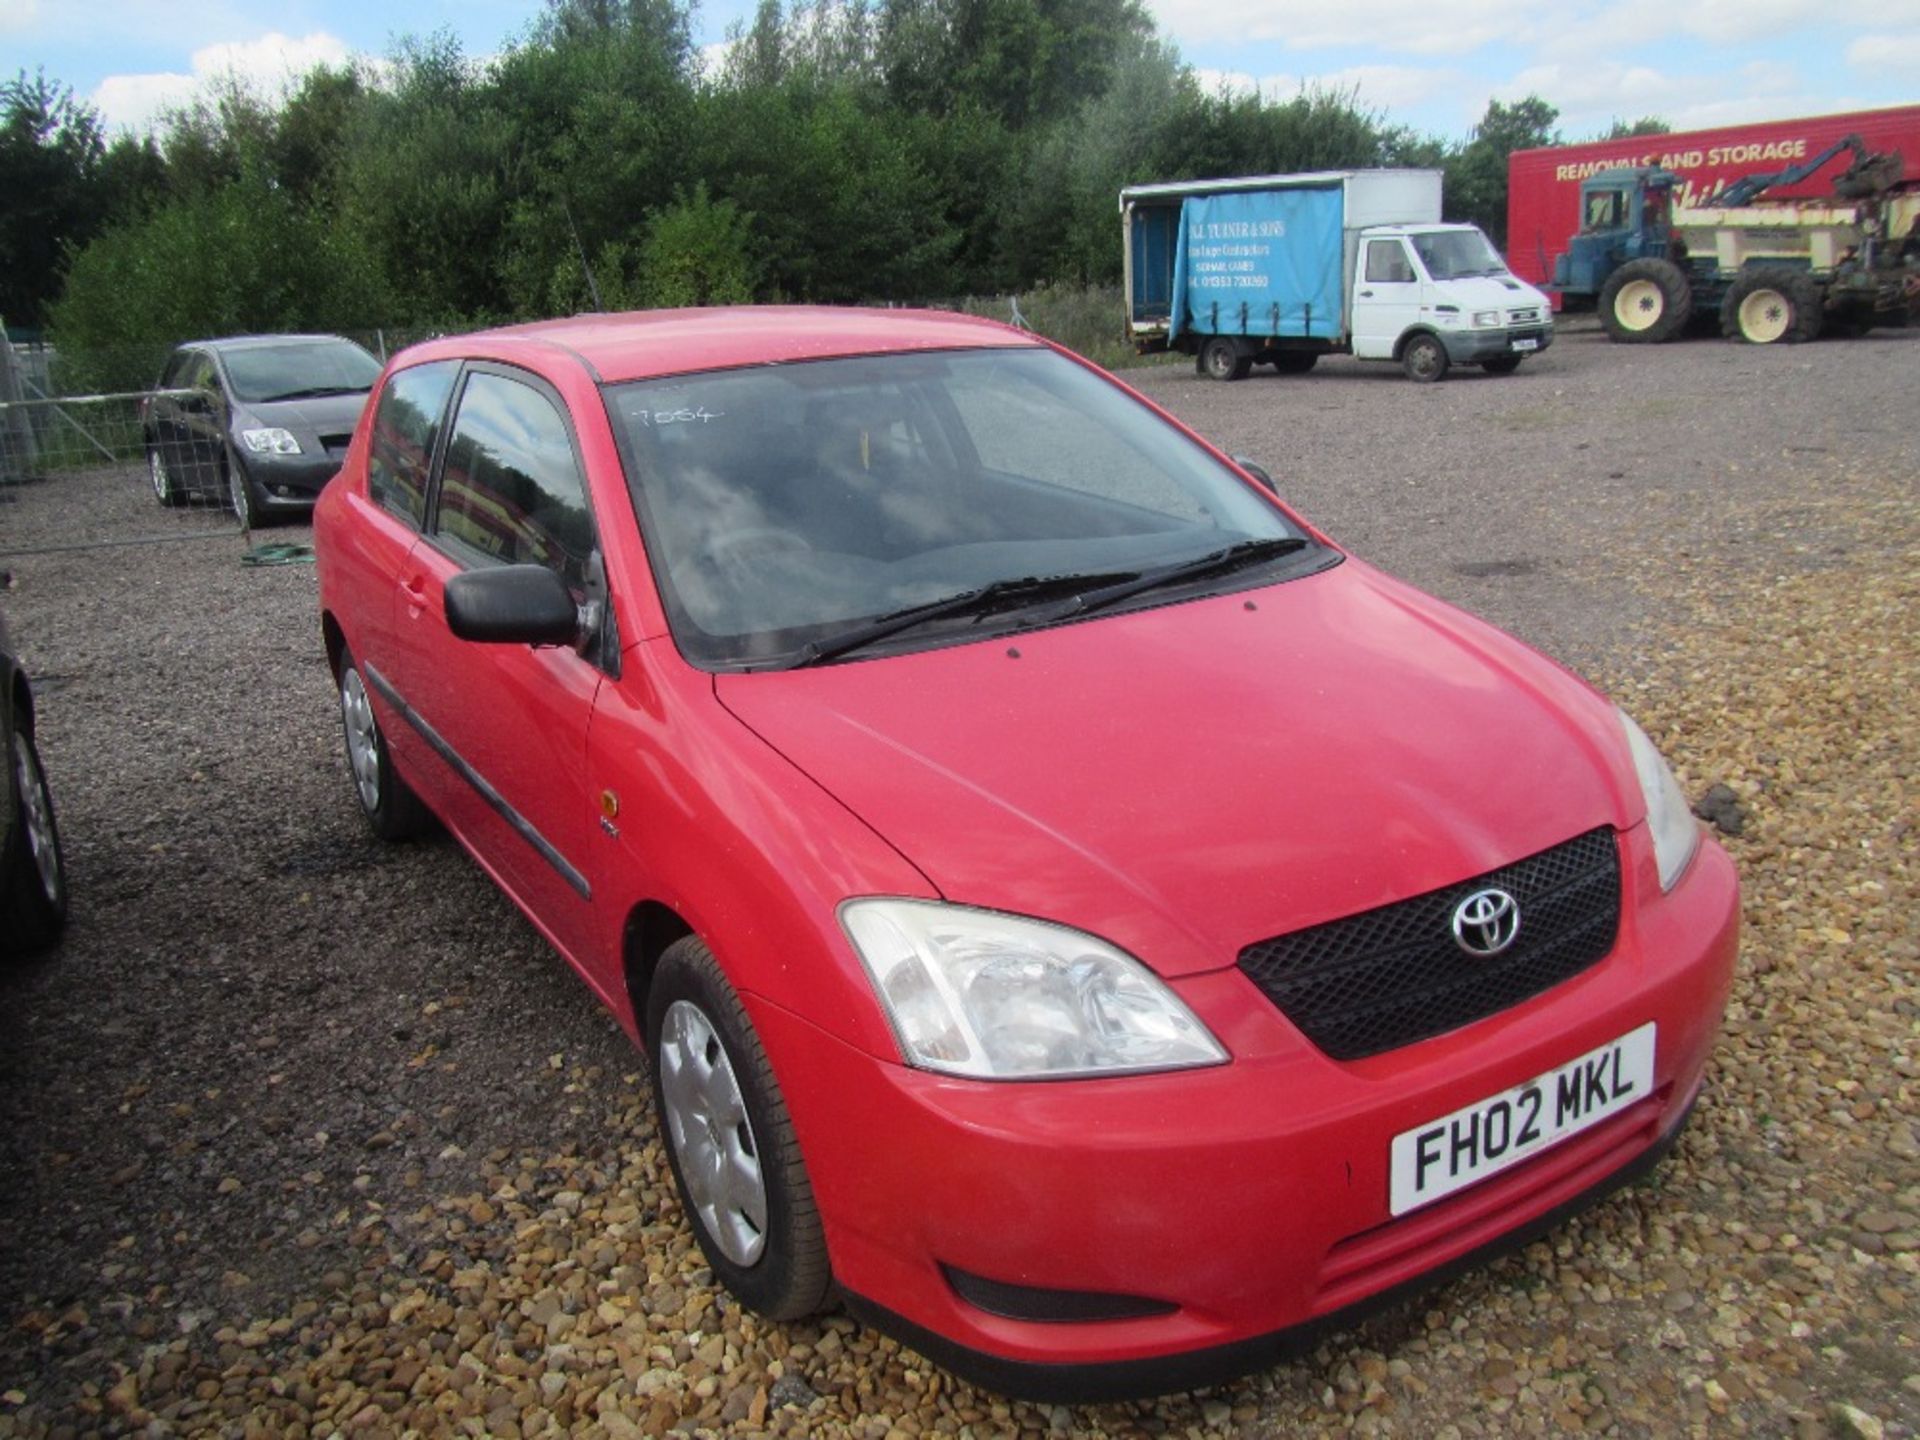 Toyota Corrola 1.4 Petrol. 1 Owner from new. Reg. Docs & Service History will be supplied Mileage: - Image 3 of 6